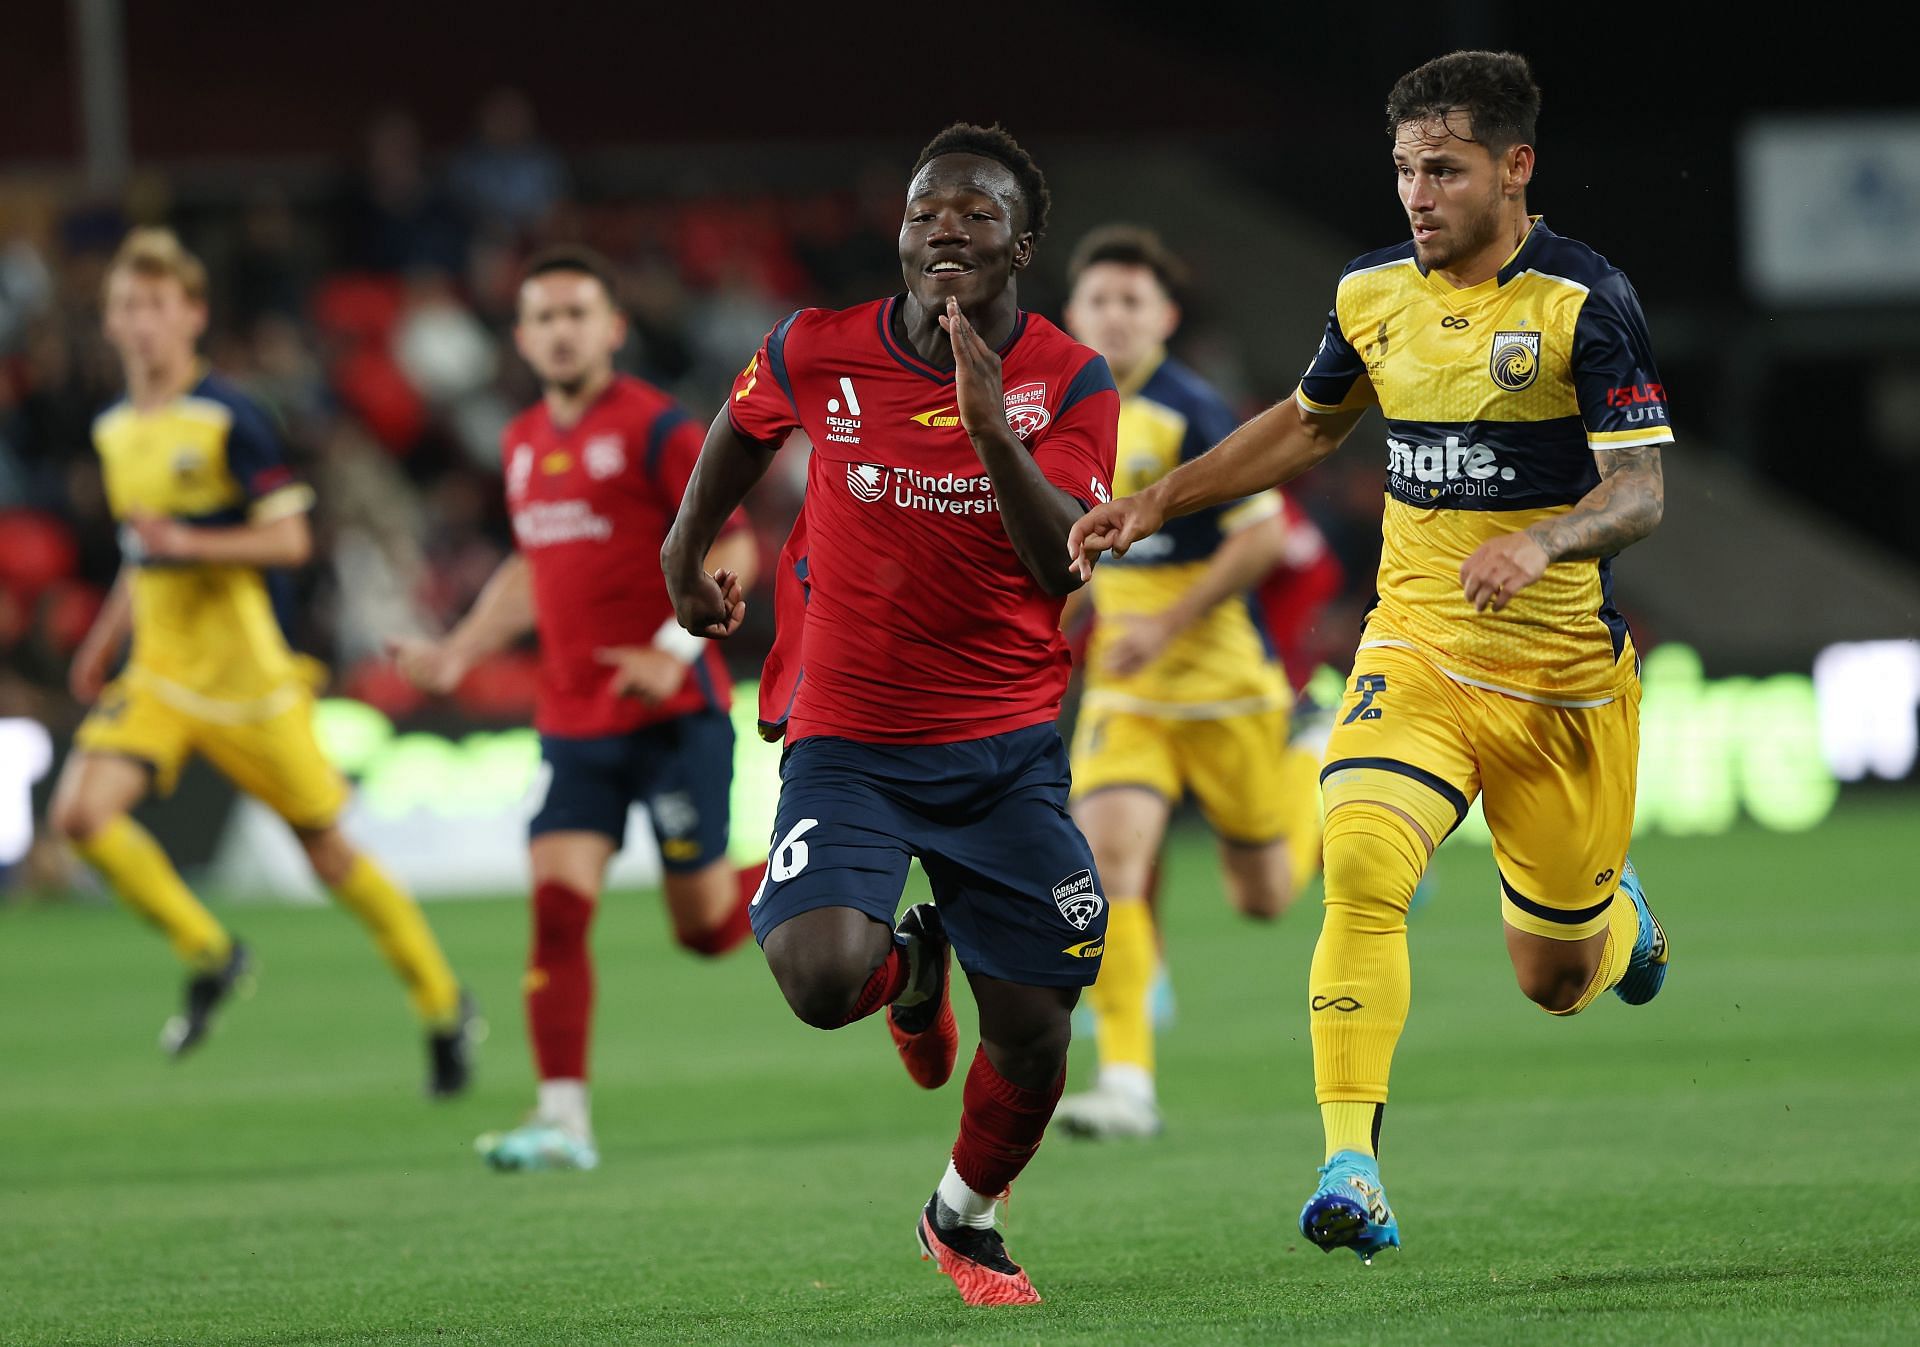 A-League Men Rd 1 - Adelaide United v Central Coast Mariners